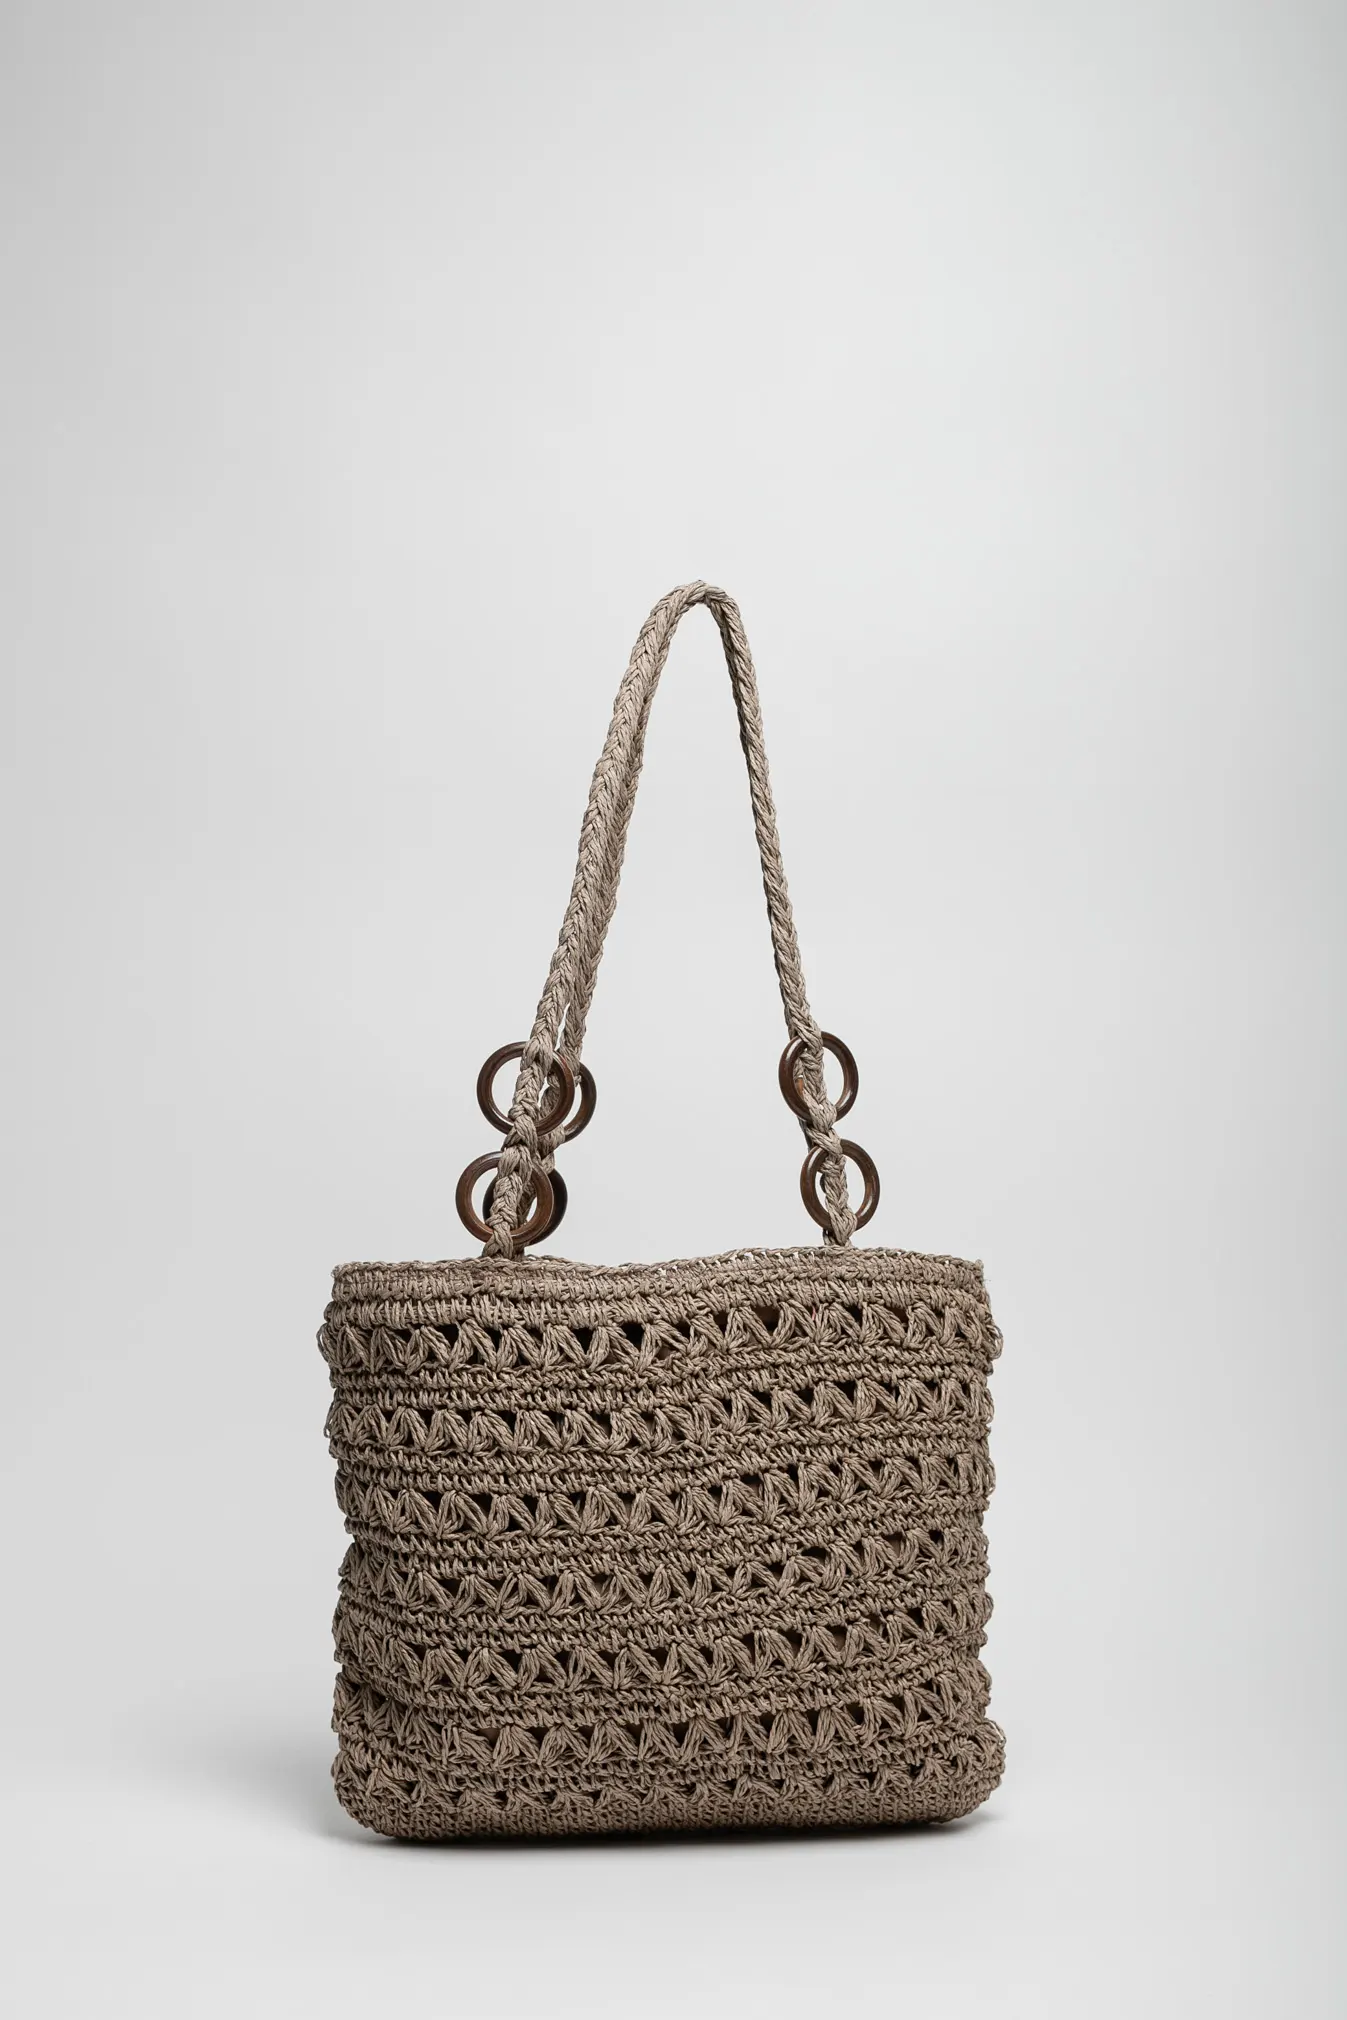 BOLSO CALIFOR - TAUPE